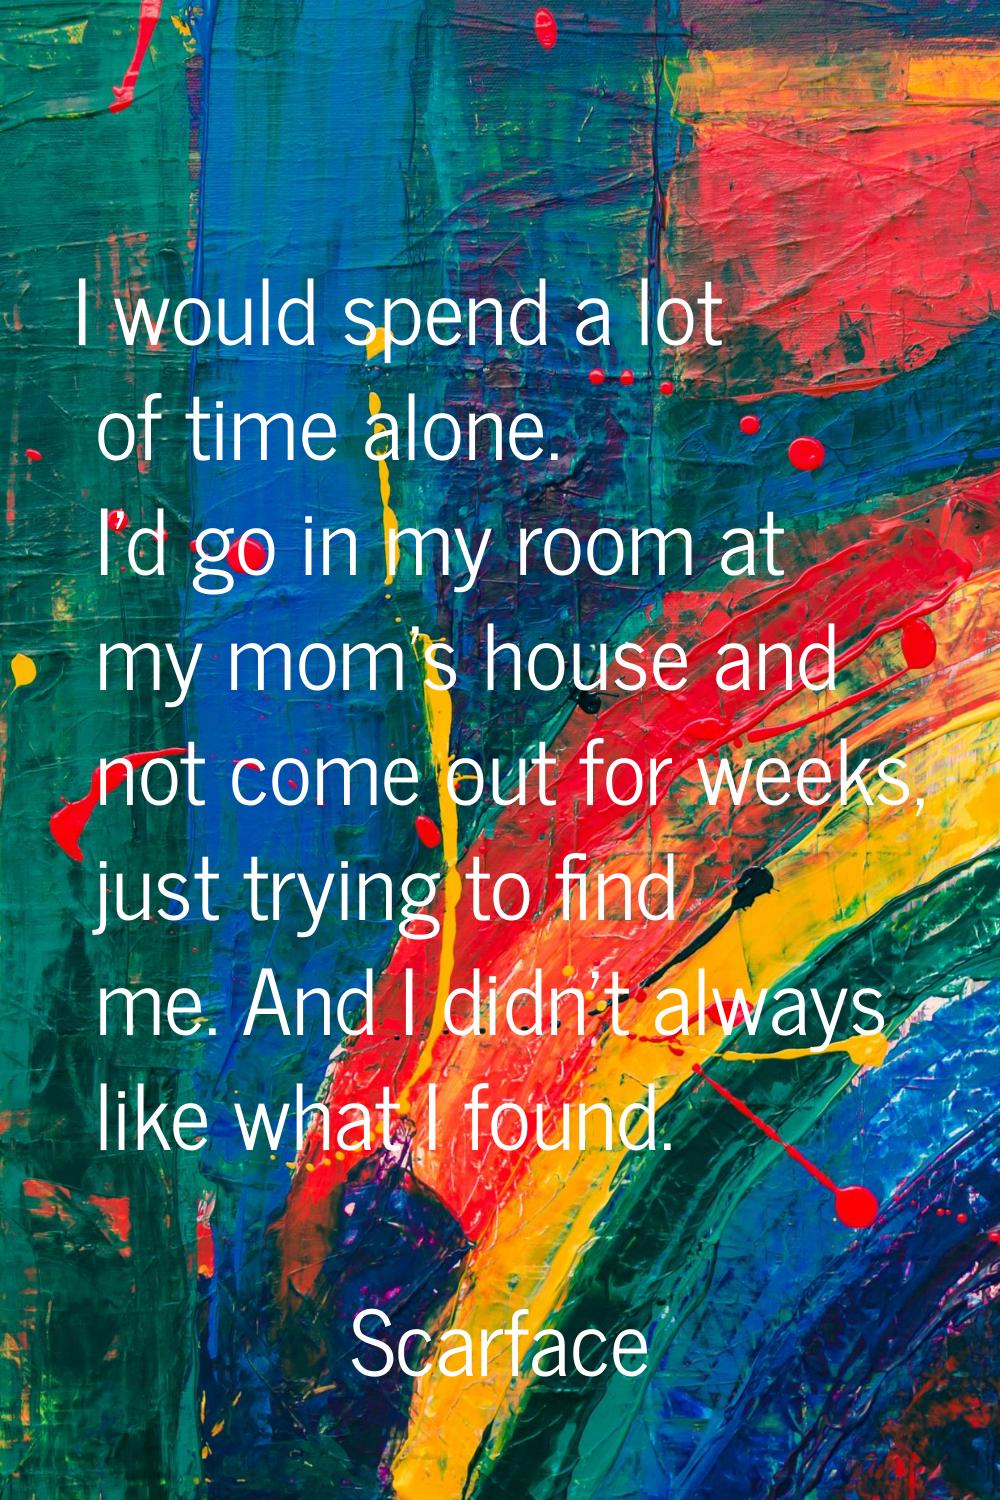 I would spend a lot of time alone. I'd go in my room at my mom's house and not come out for weeks, 